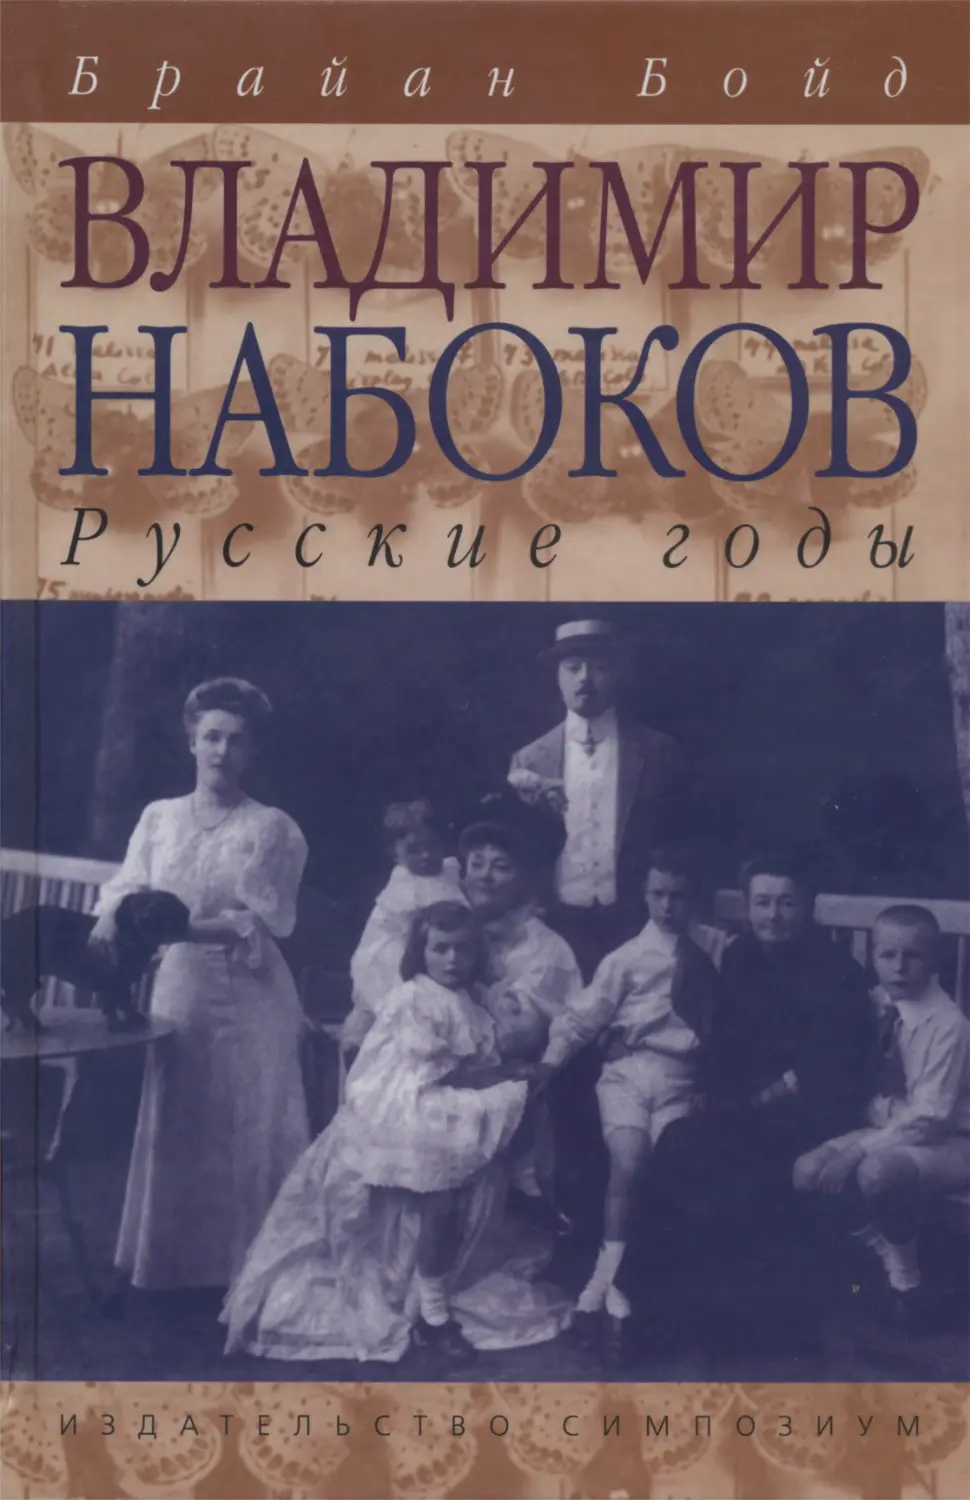 COVER1